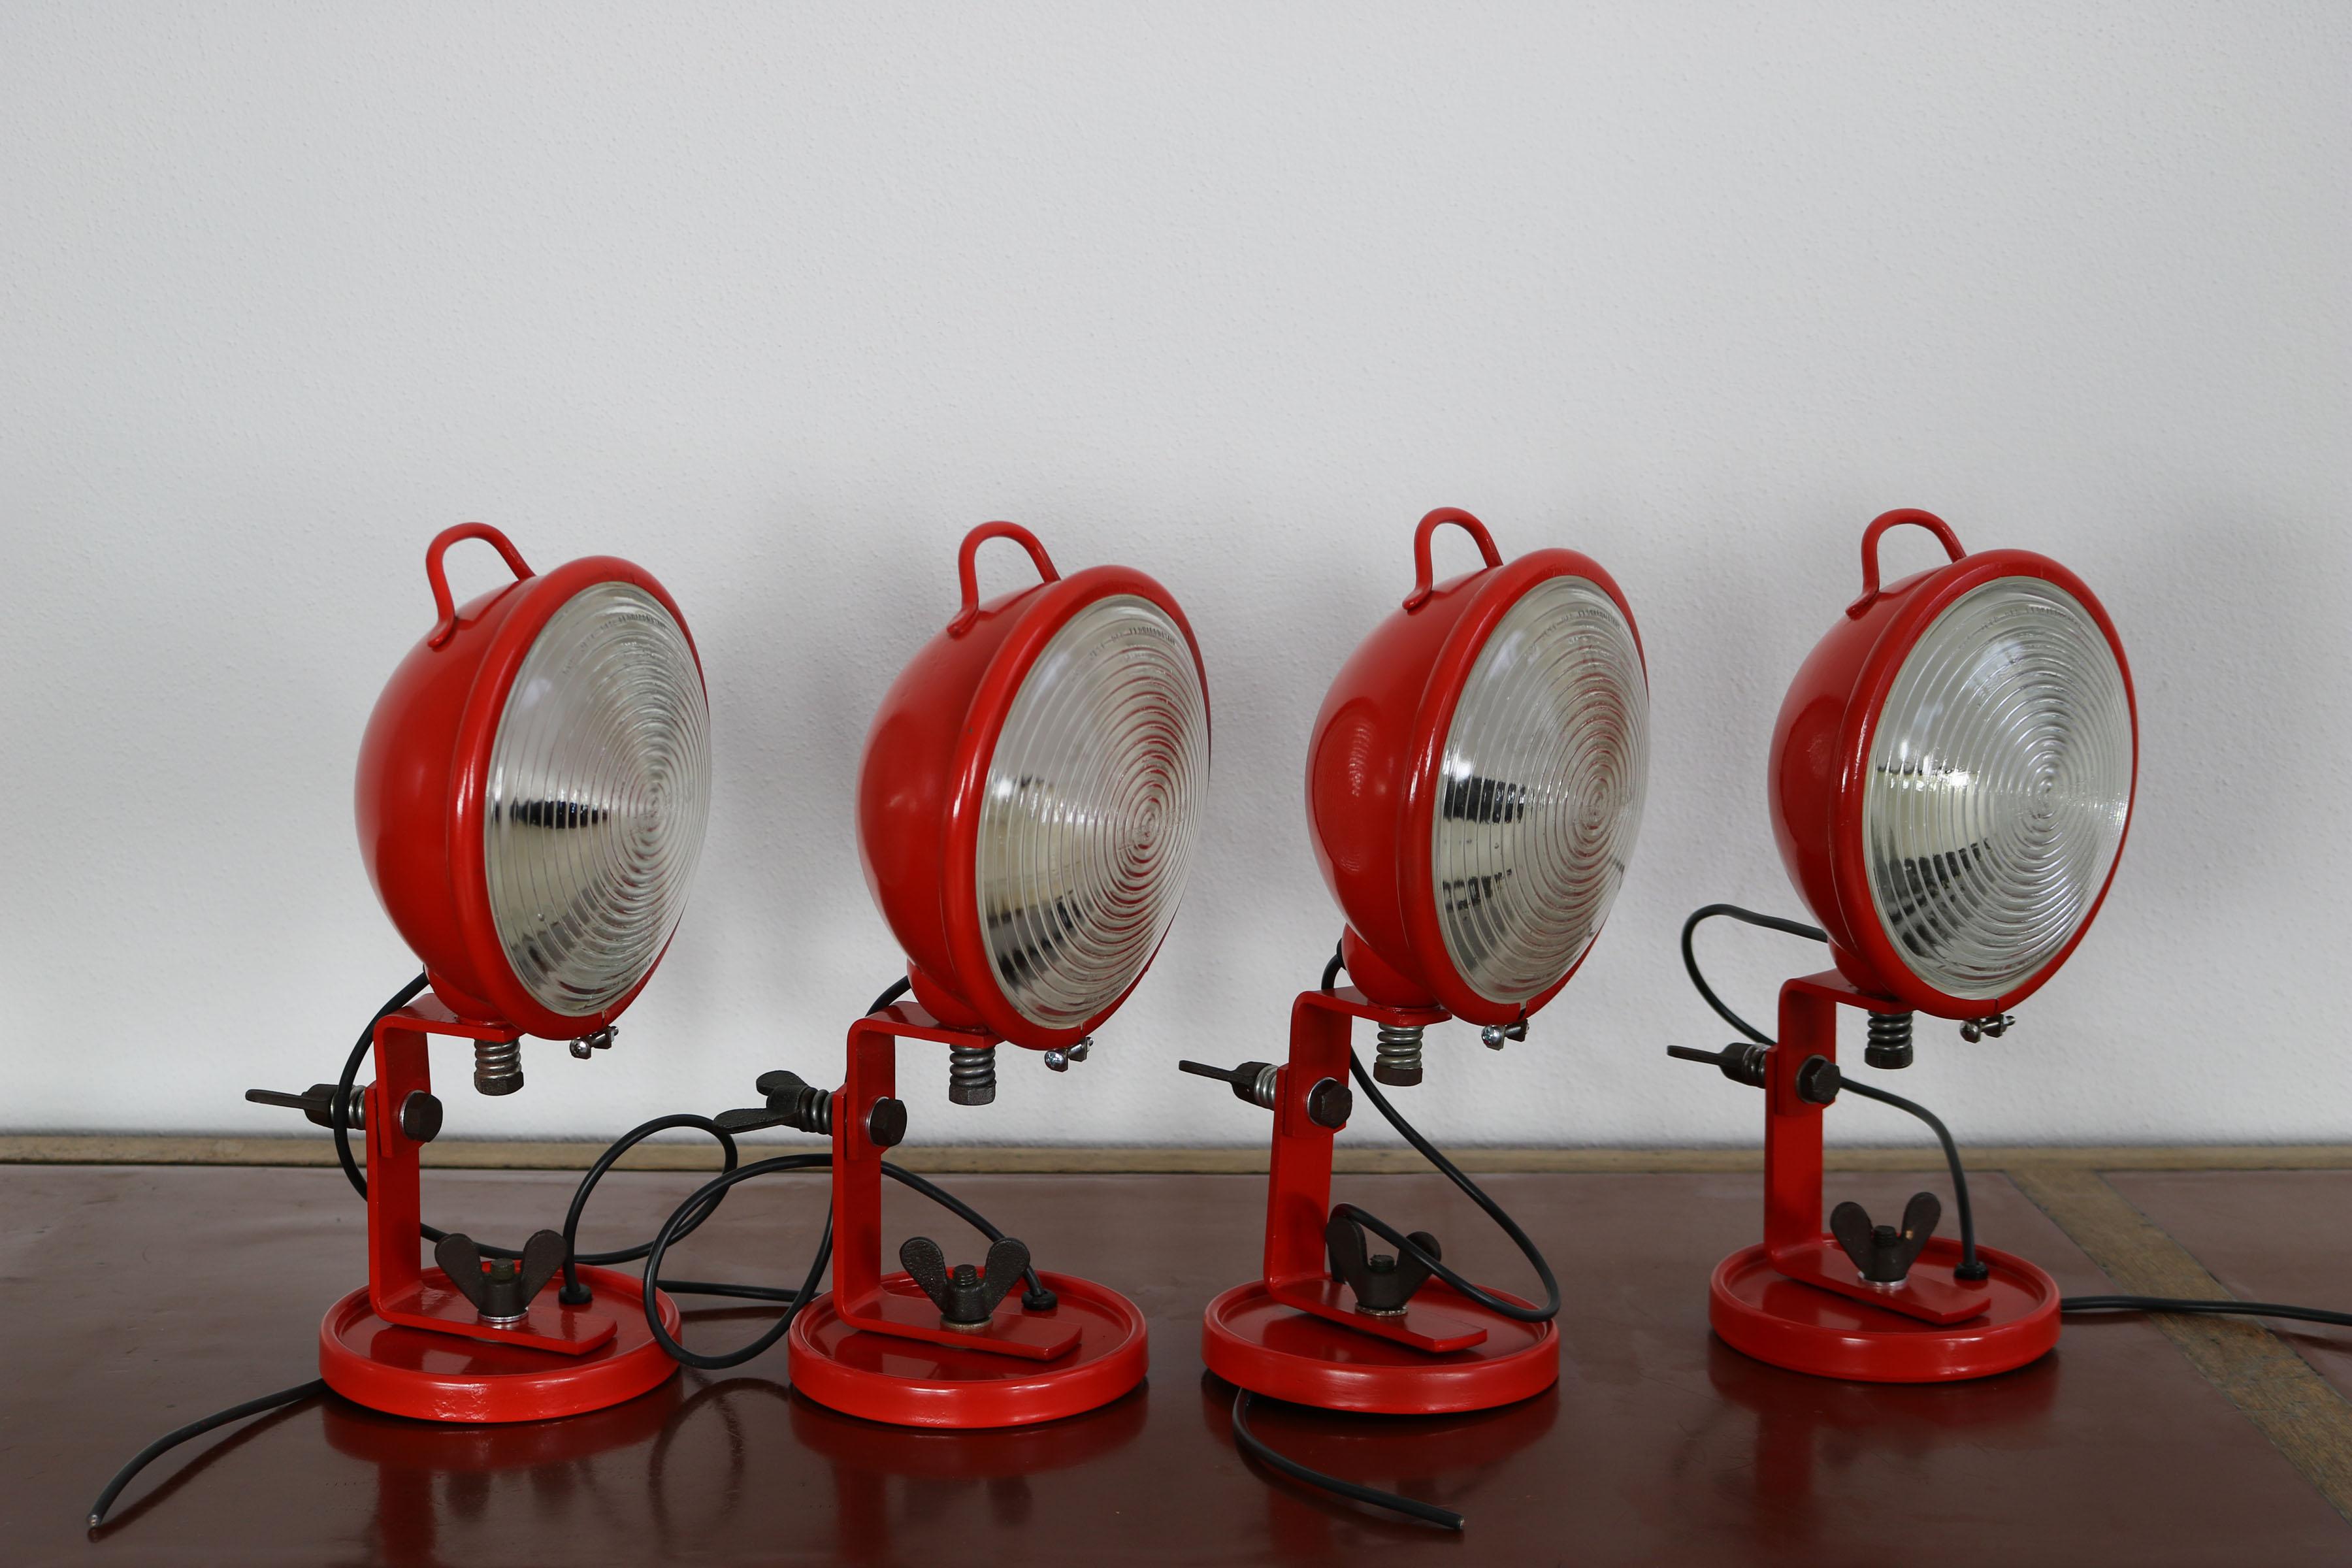 Cesare Leonardi and Franca Stagi for Lumenform, 'Jeep', wall light, red metal, steel, wire, Italy, 1969

This wall light by Leonardi and Stagi has a round red semi-circular shade and round wall fixture. The lamp breathes the credo of form follows